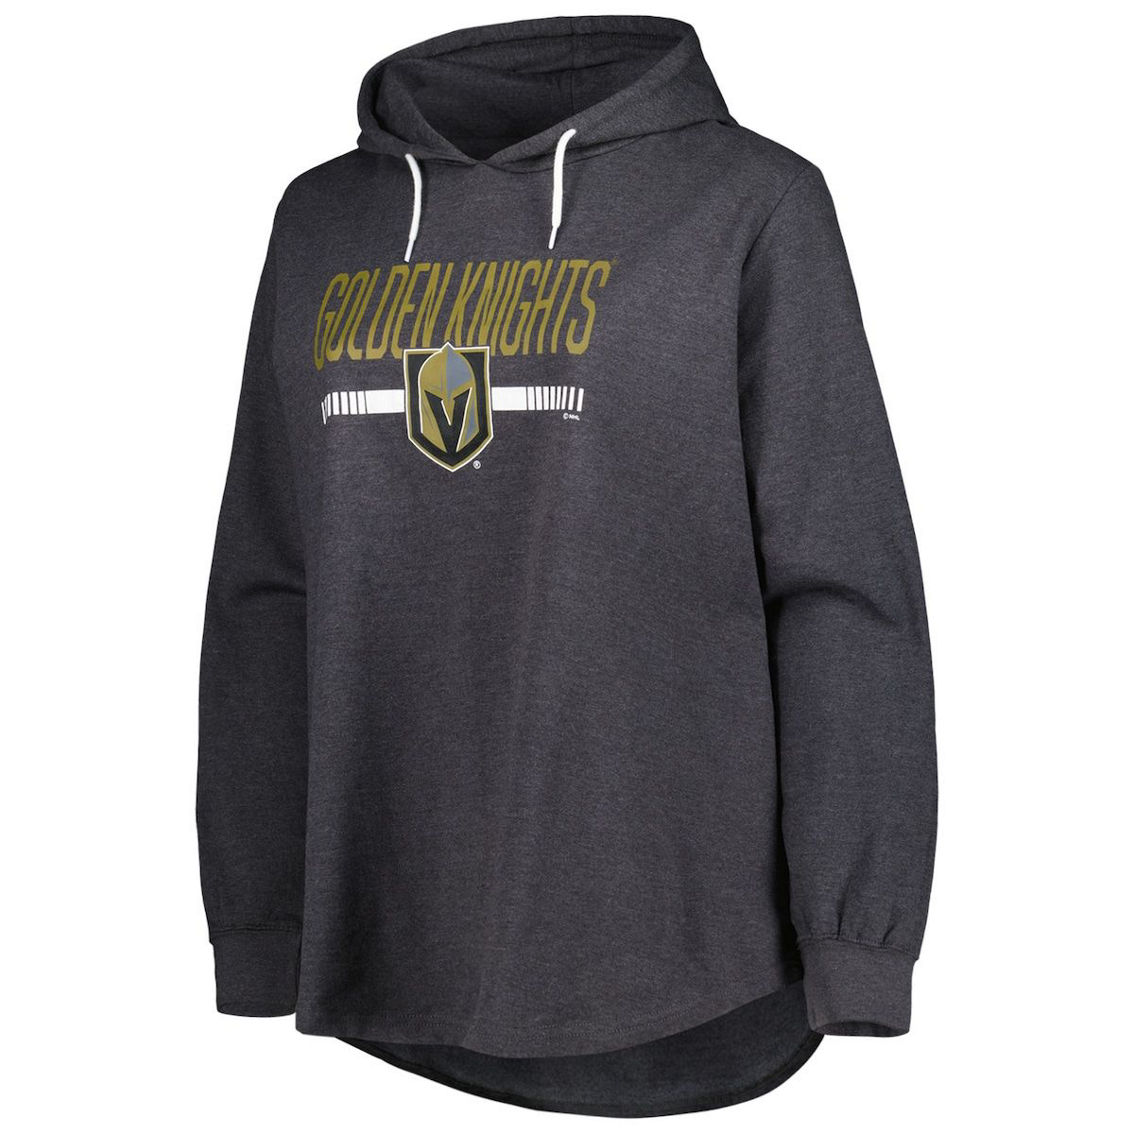 Profile Women's Heather Charcoal Vegas Golden Knights Plus Size Fleece Pullover Hoodie - Image 3 of 4